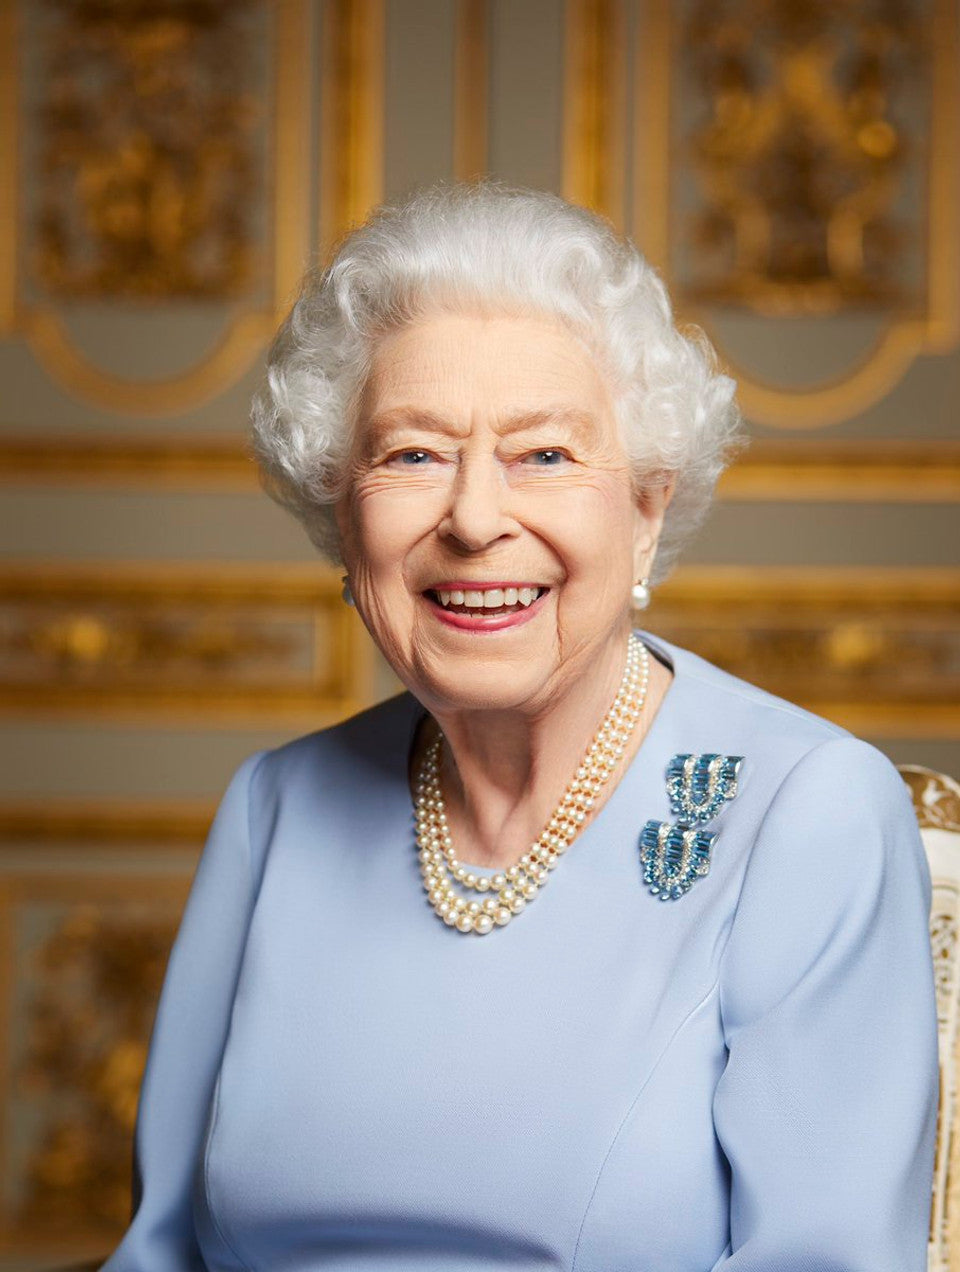 A Tribute to Her Majesty Queen Elizabeth II from Lady Middlesex